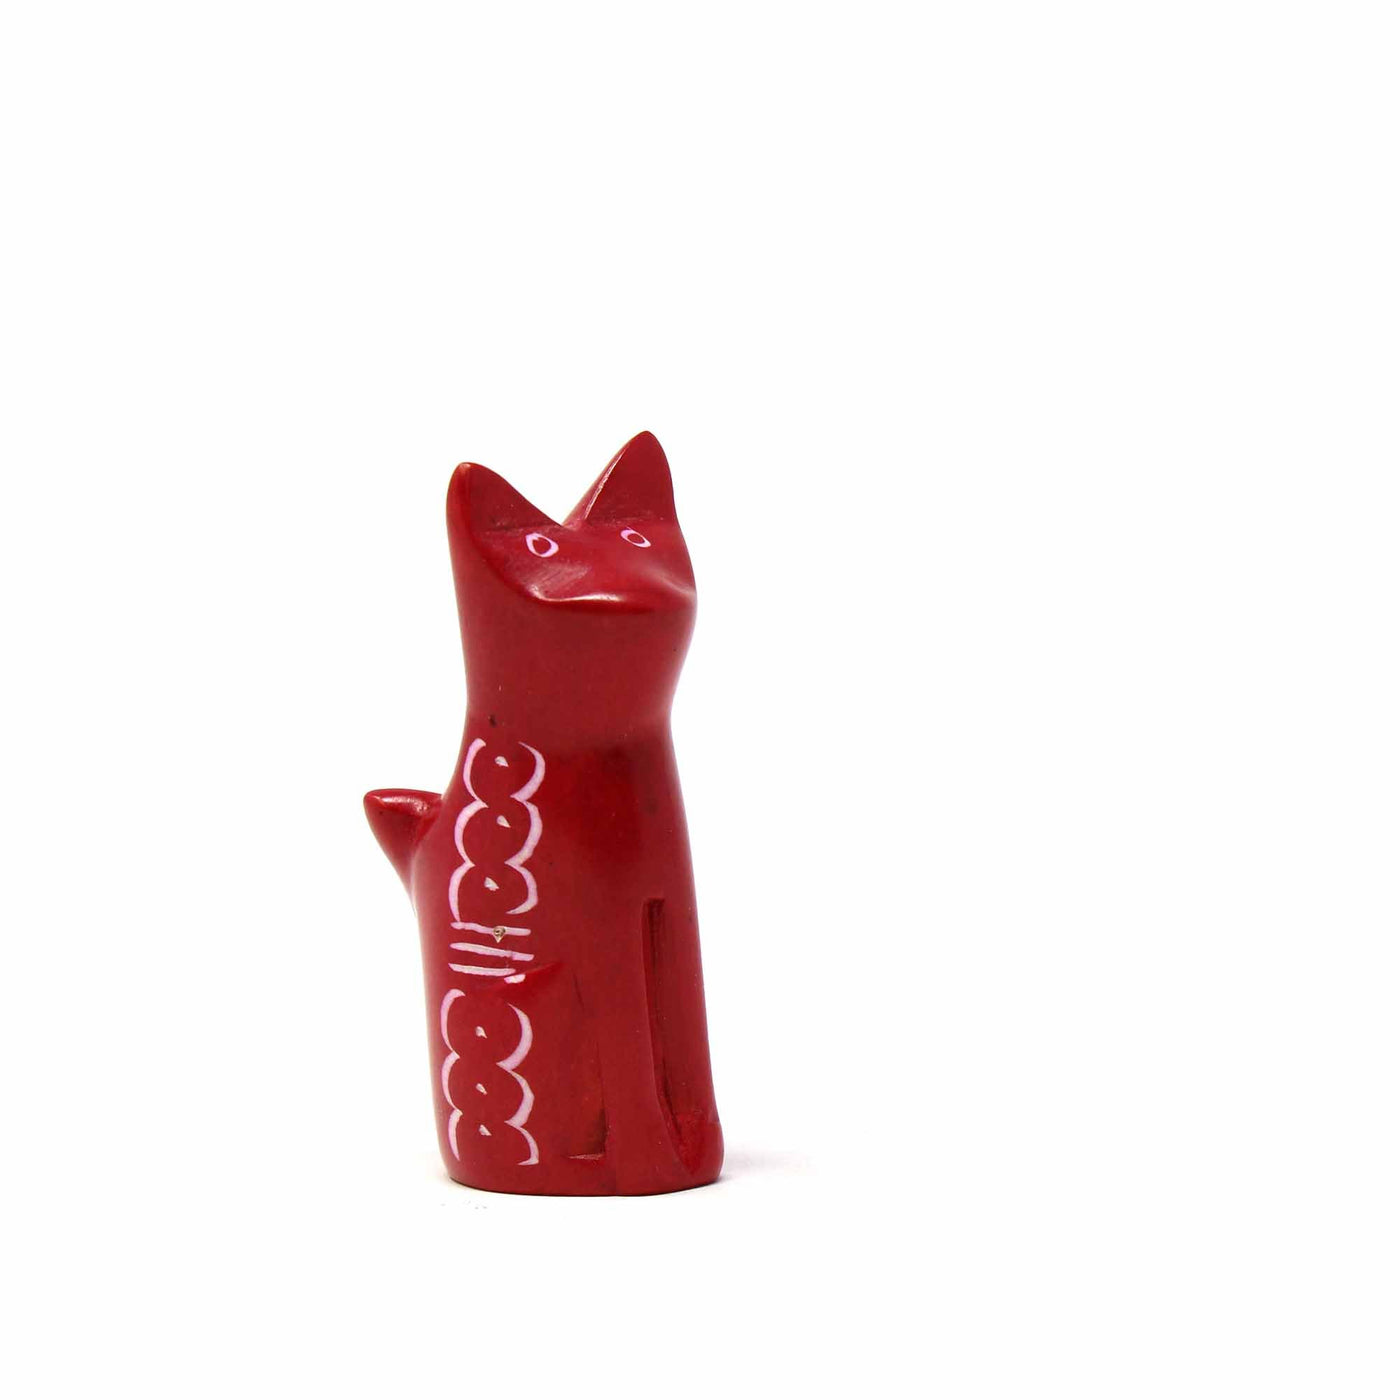 Soapstone Tiny Sitting Cats - Assorted Pack